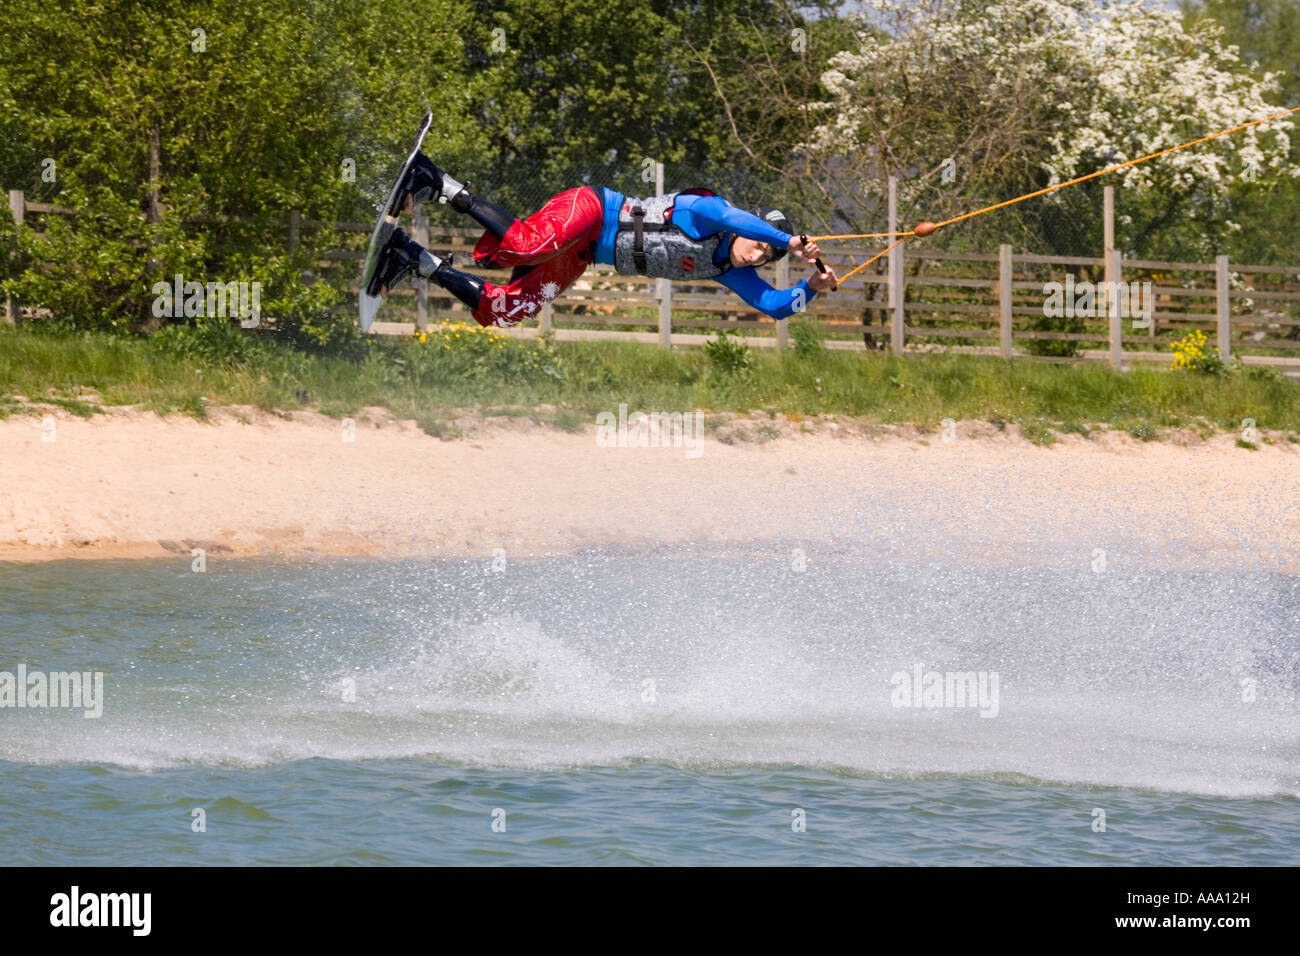 Wake boarding with a cable tow at Watermark Ski, Cotswold Water Park, South Cerney, Gloucestershire Stock Photo